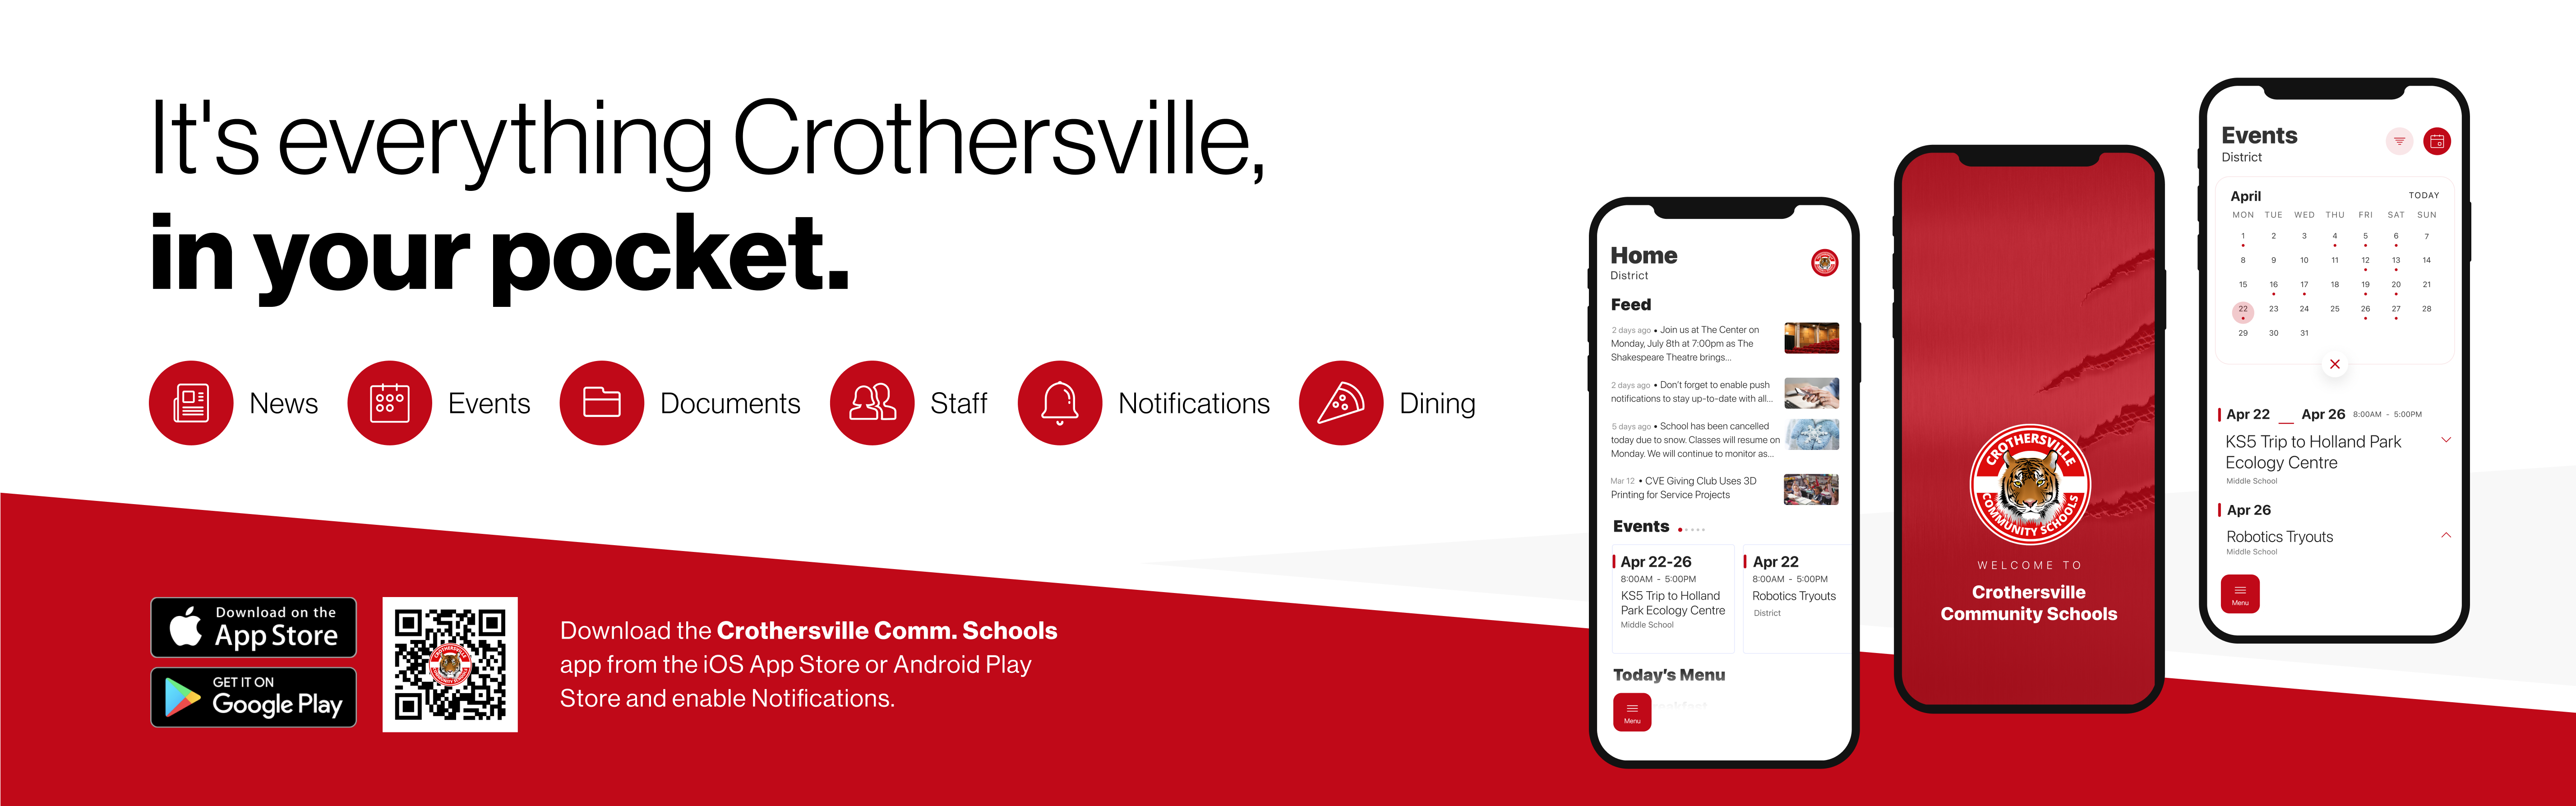 It's everything Crothersville in your pocket - download the new app